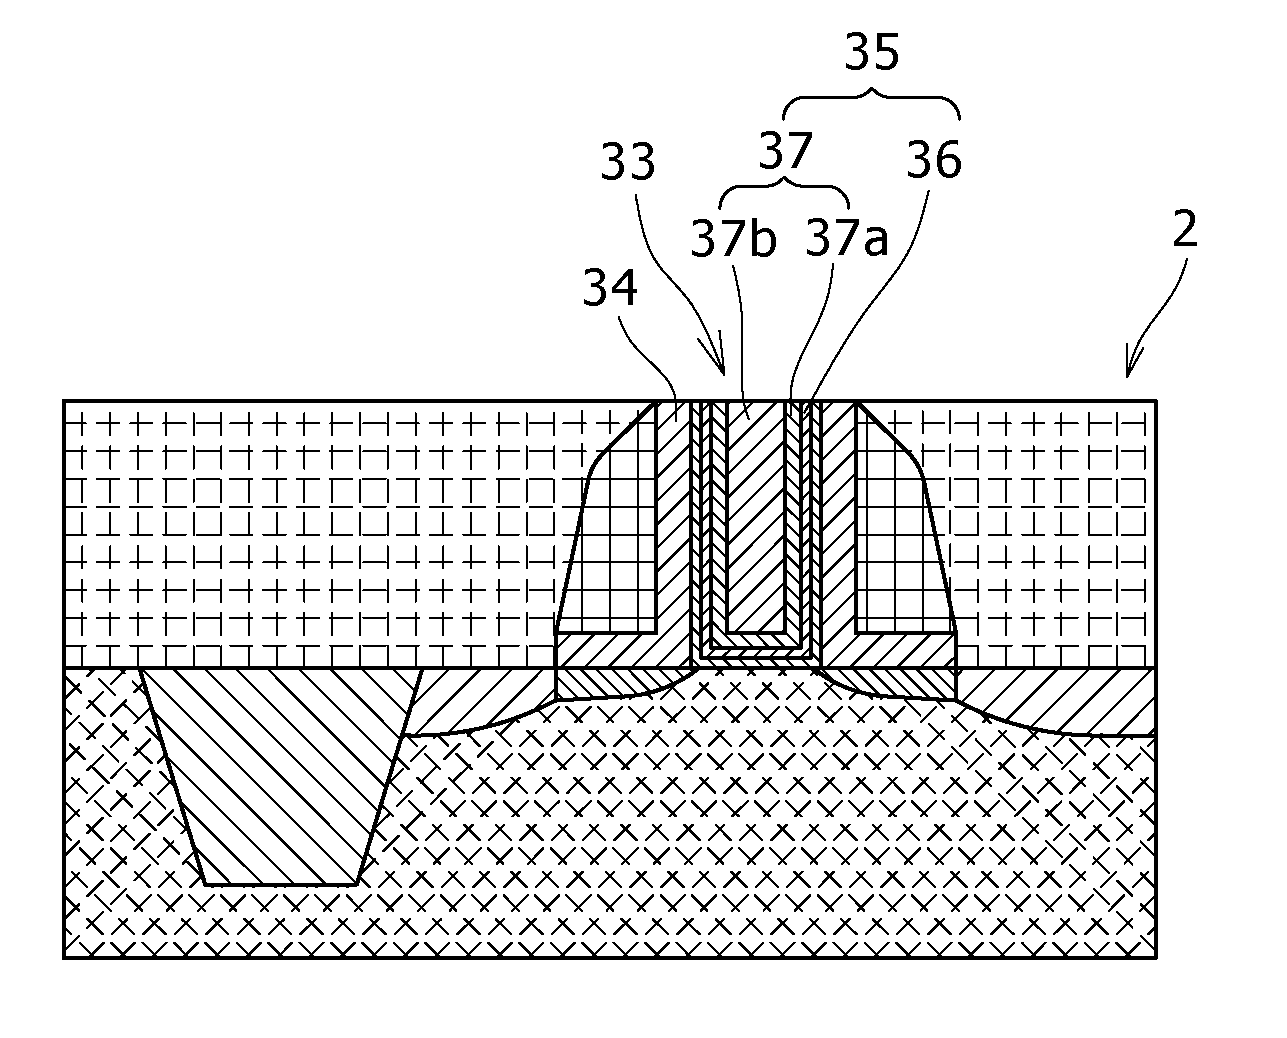 Semiconductor devices and fabrication process thereof